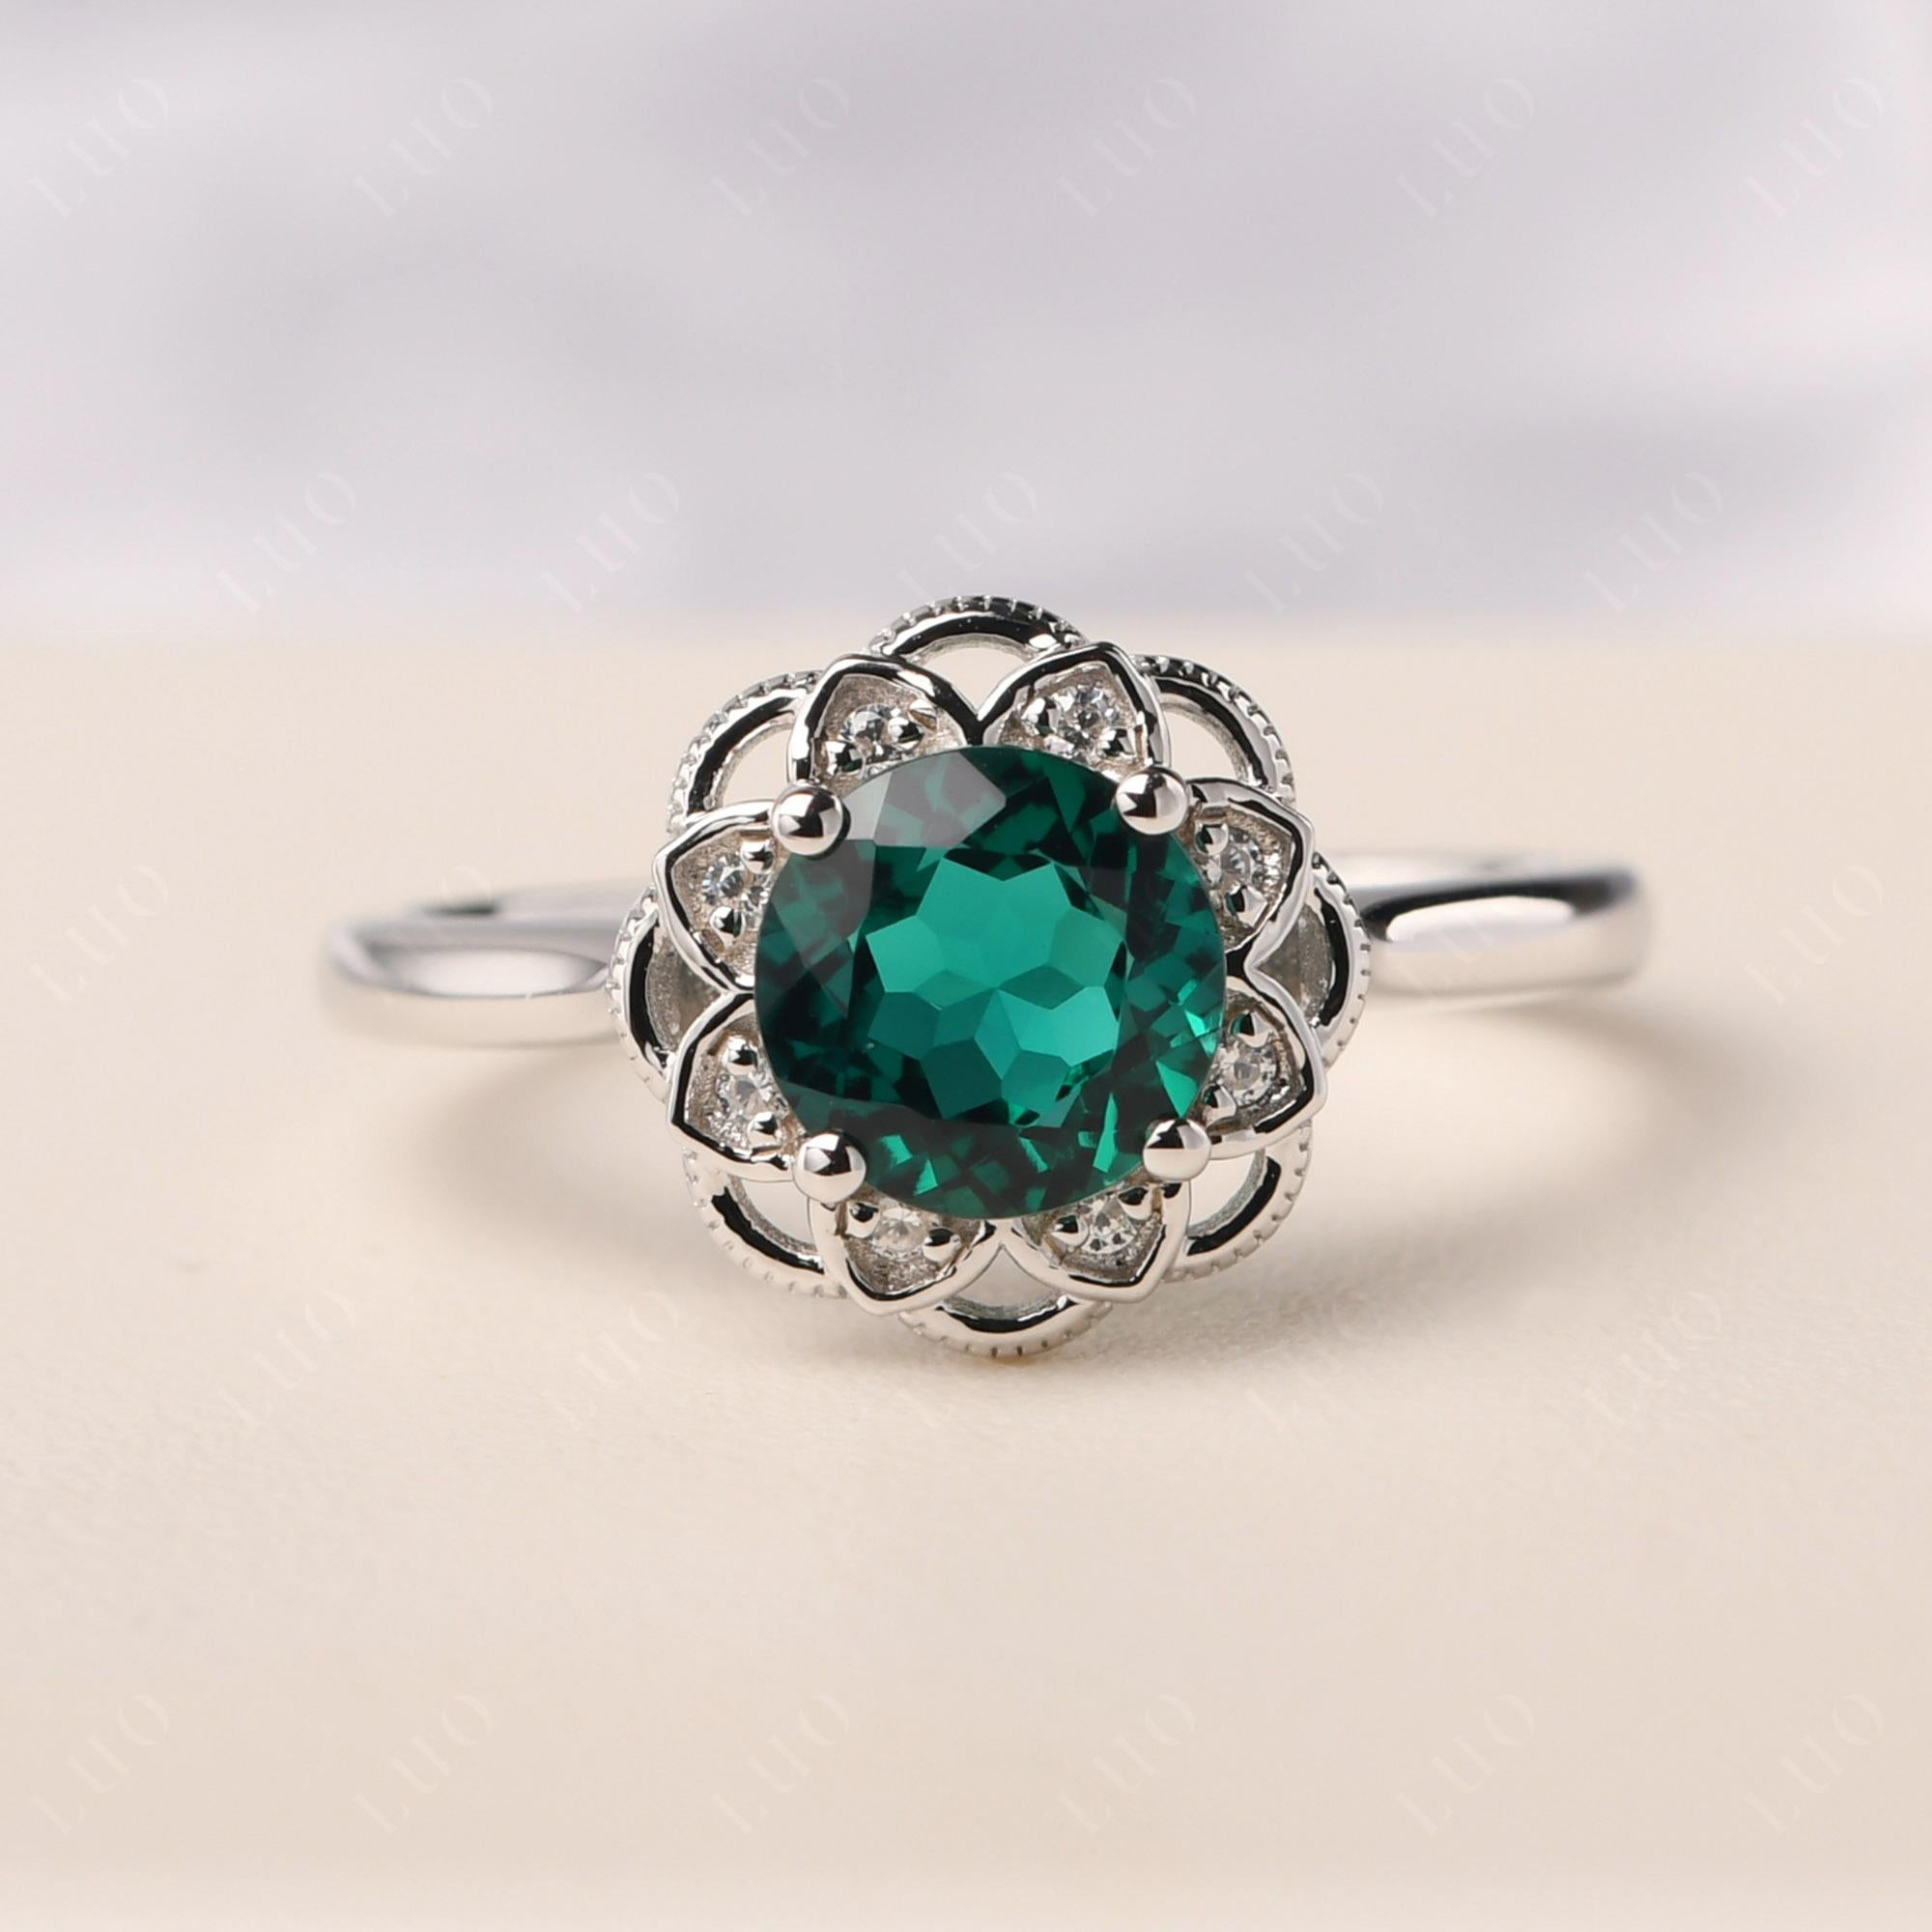 Emerald Vintage Inspired Filigree Ring - LUO Jewelry